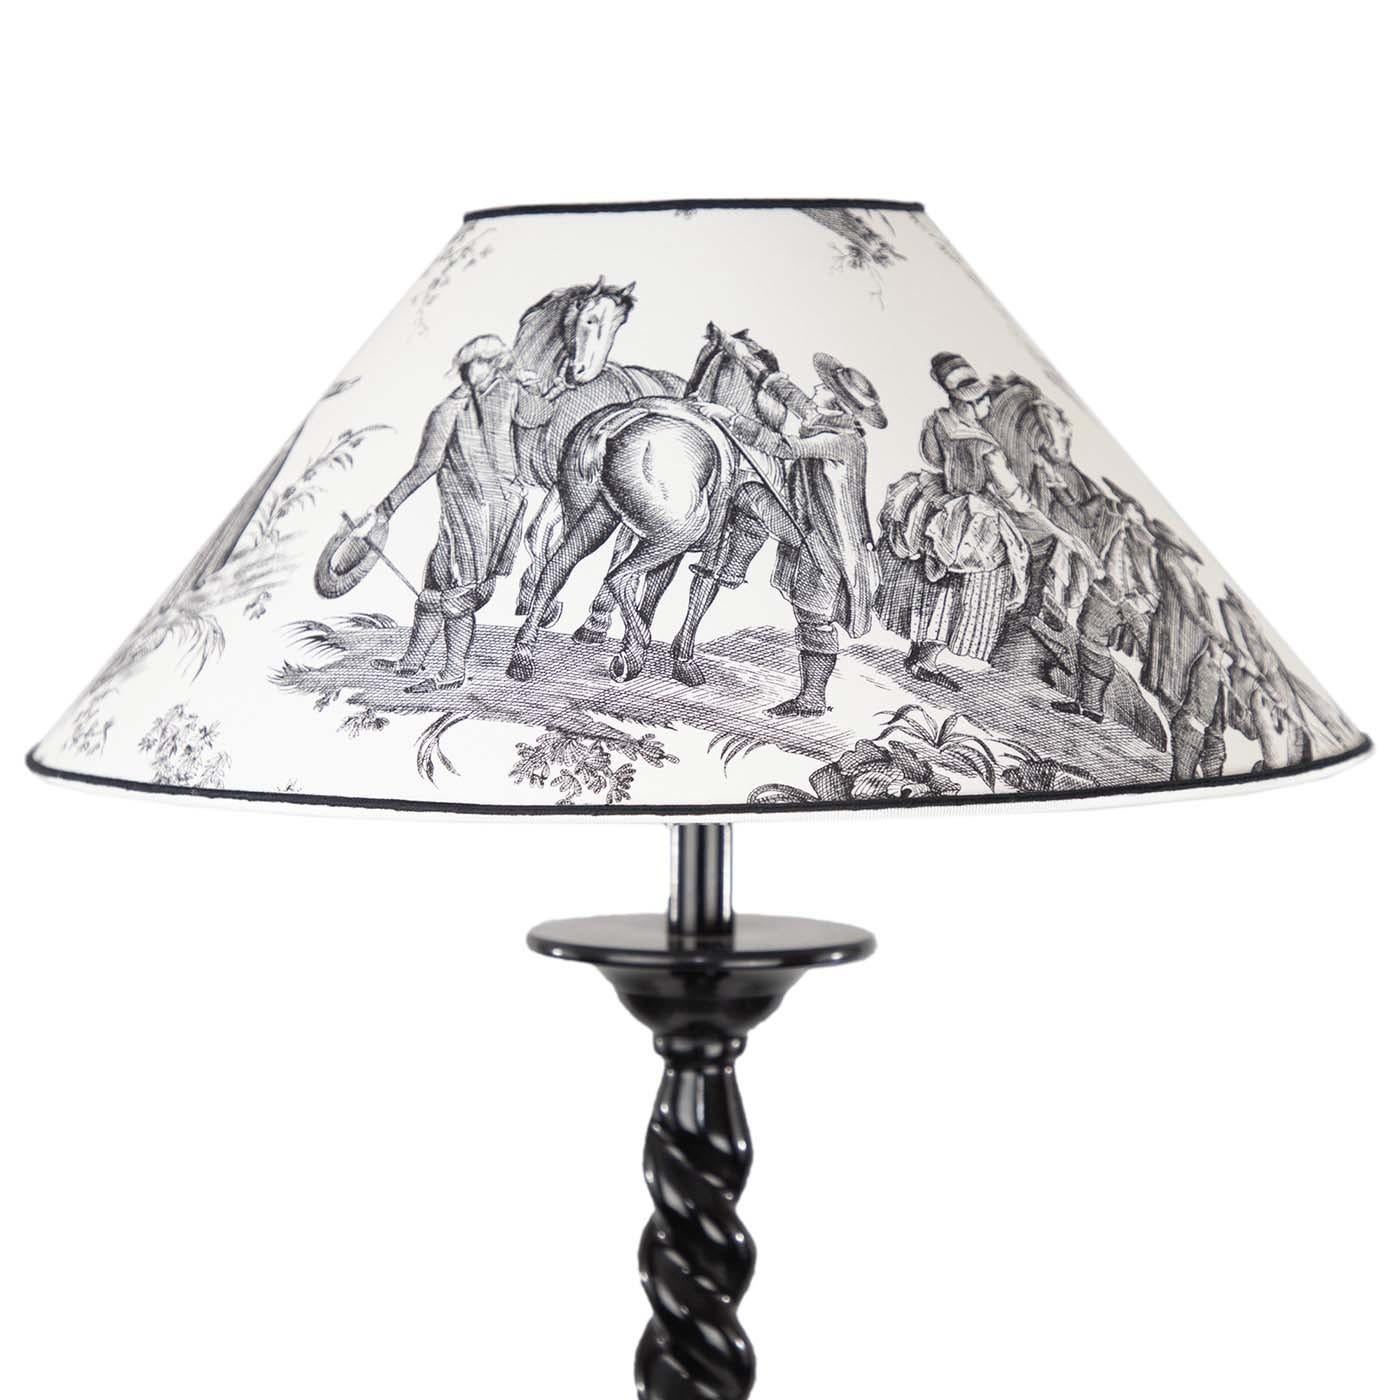 Add a bit of light to any room with this table lamp that is both modern and Classic. The lamp rests on a black metal base while its black body is in a beautiful twisting shape. The lamp's wide conical lampshade completes this piece and is made from